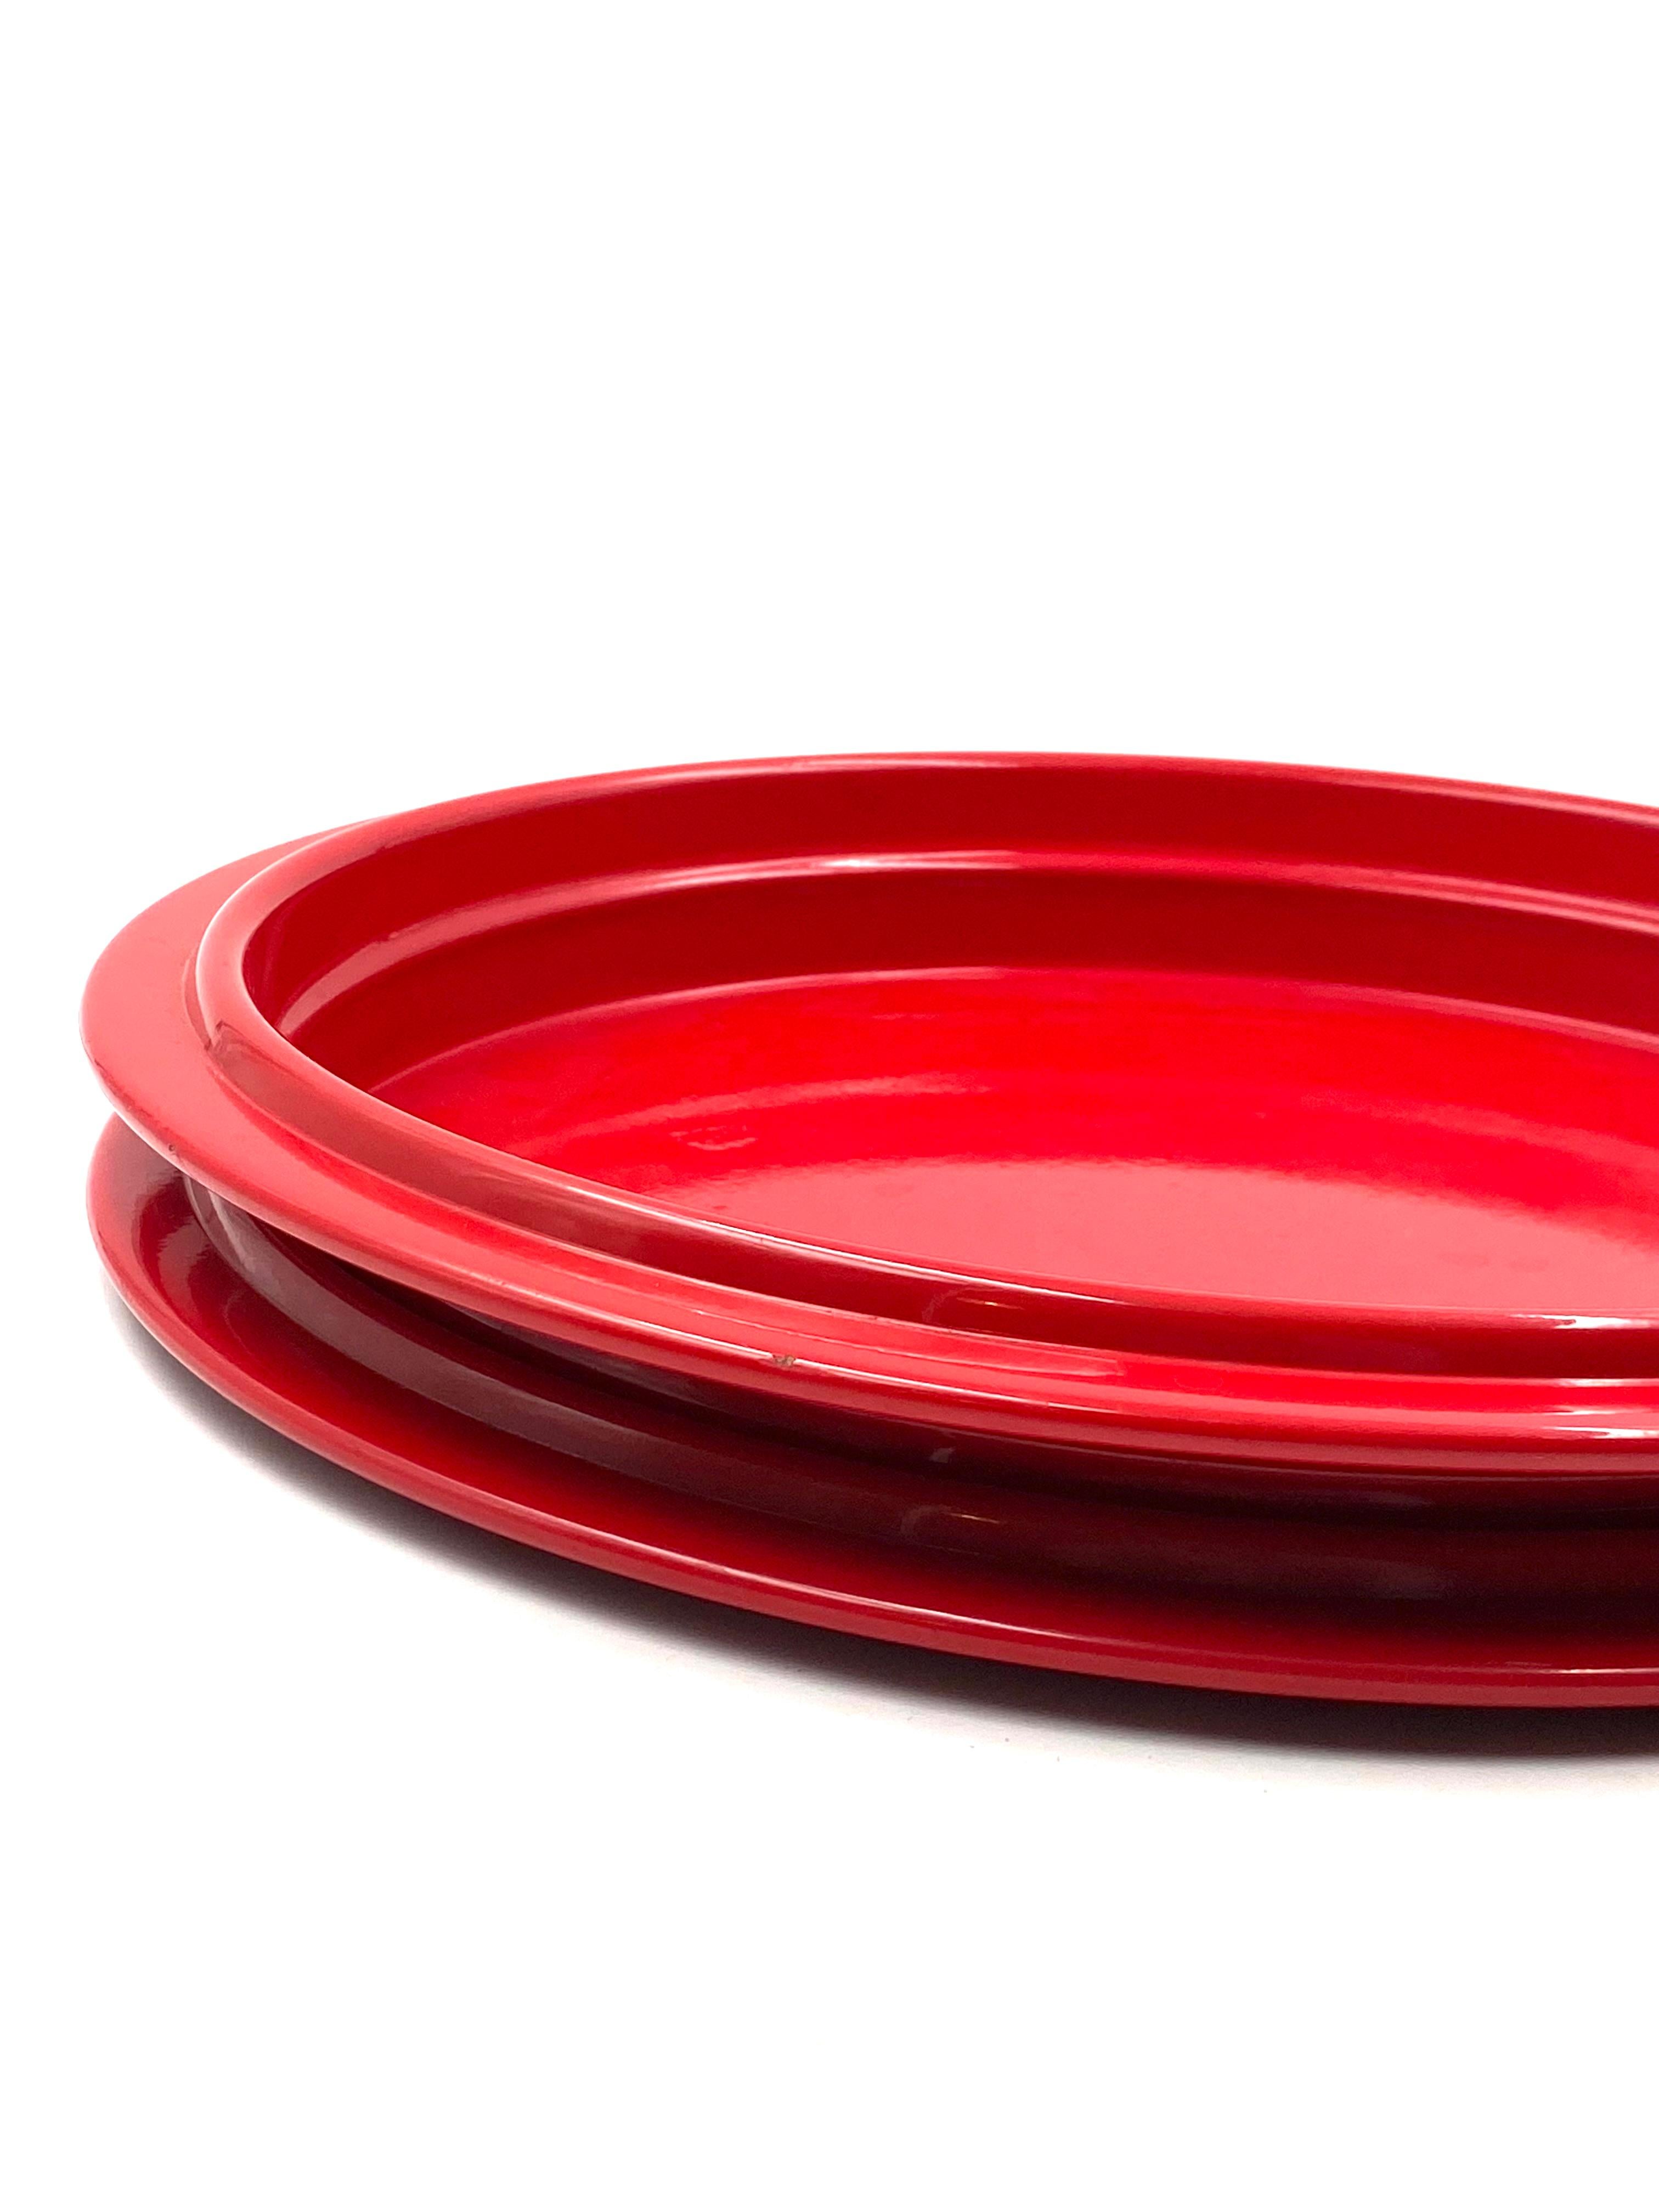 Gianfranco Frattini, Red Centerpiece / Tray, Progetti Italy, 1970s For Sale 3